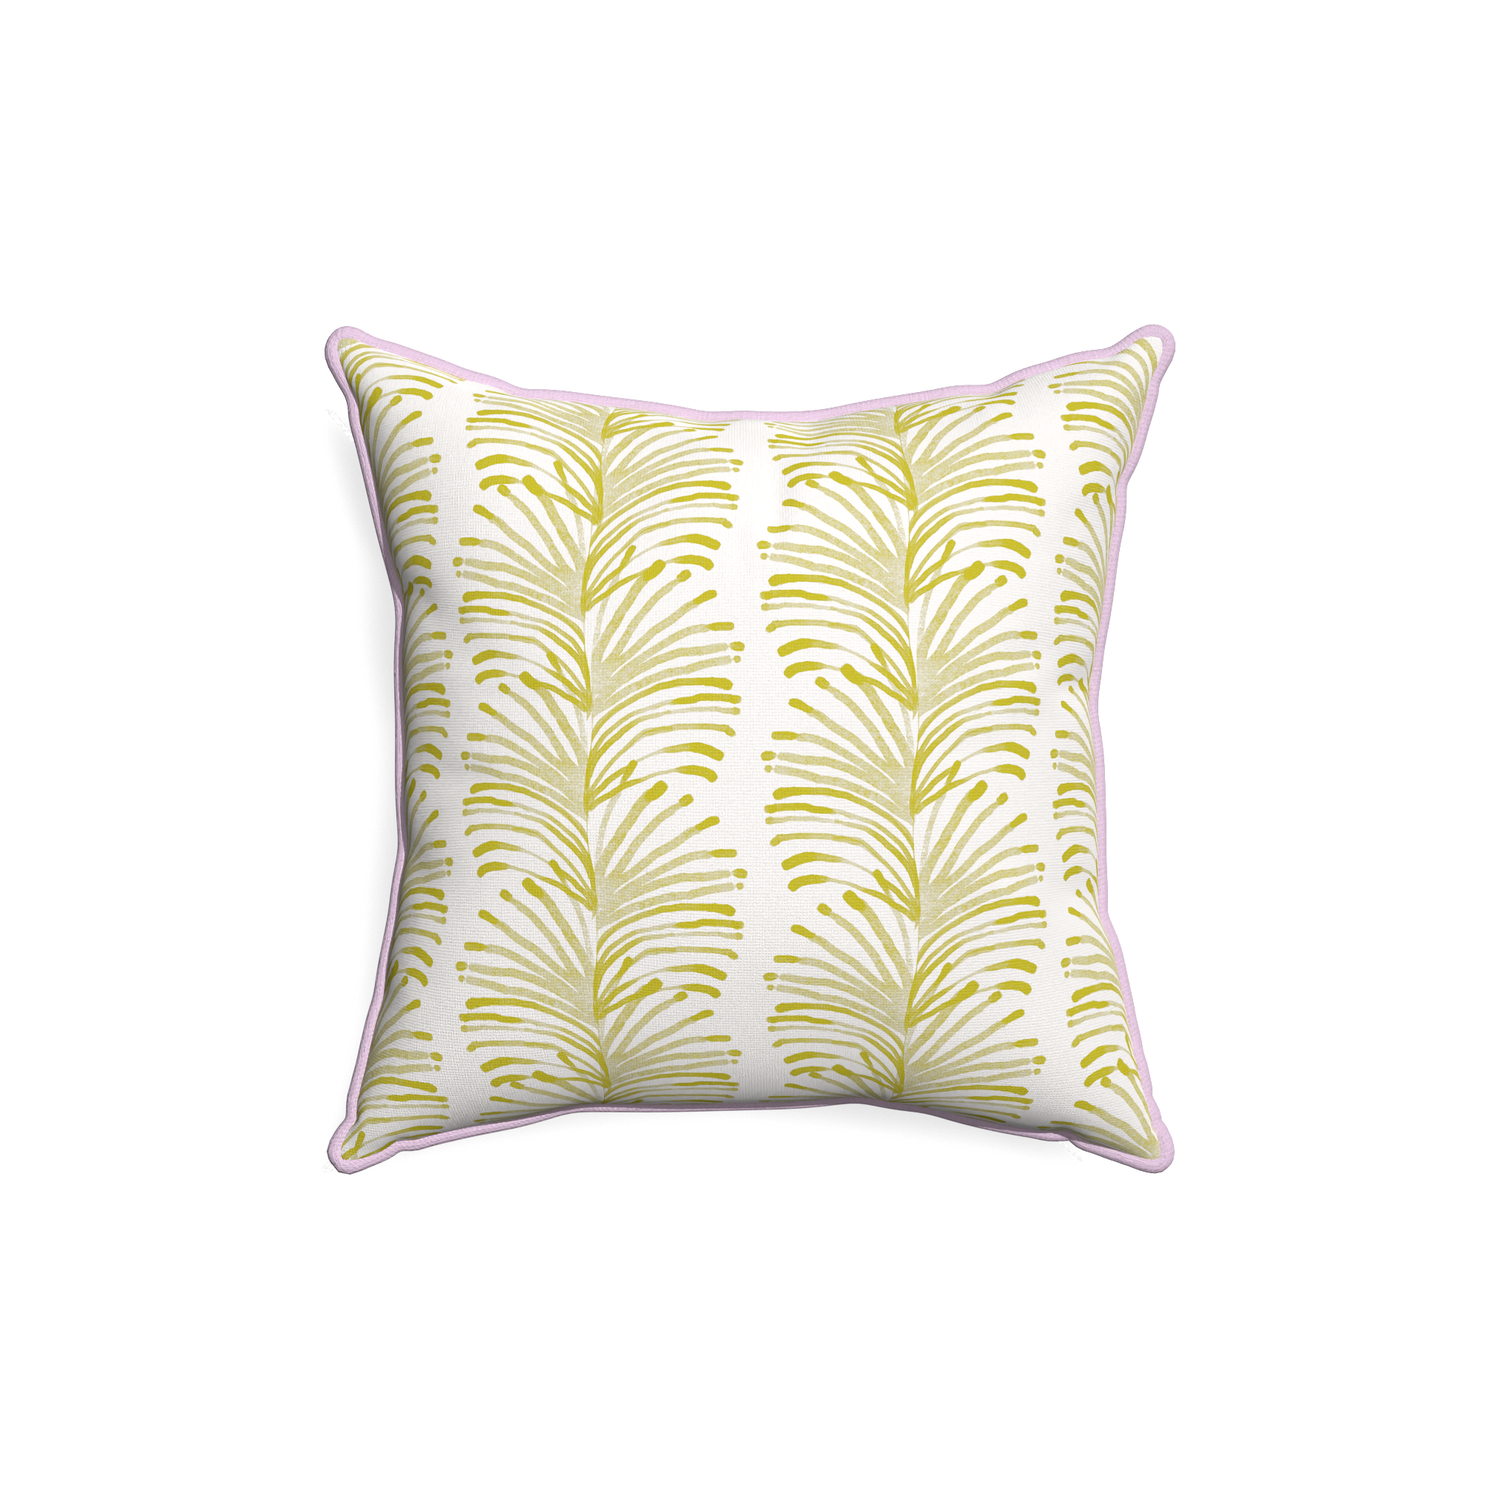 18-square emma chartreuse custom pillow with l piping on white background